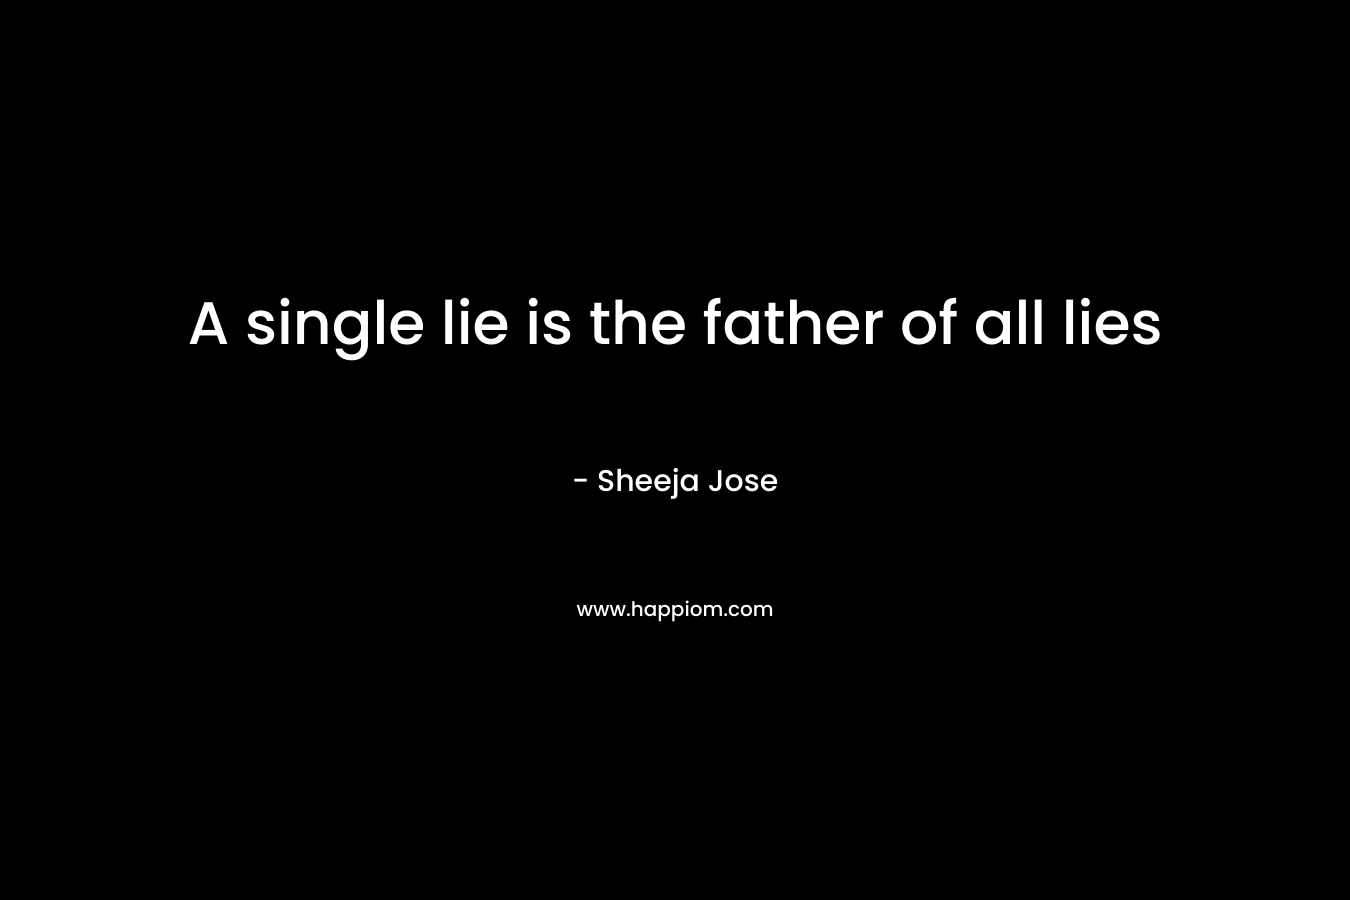 A single lie is the father of all lies